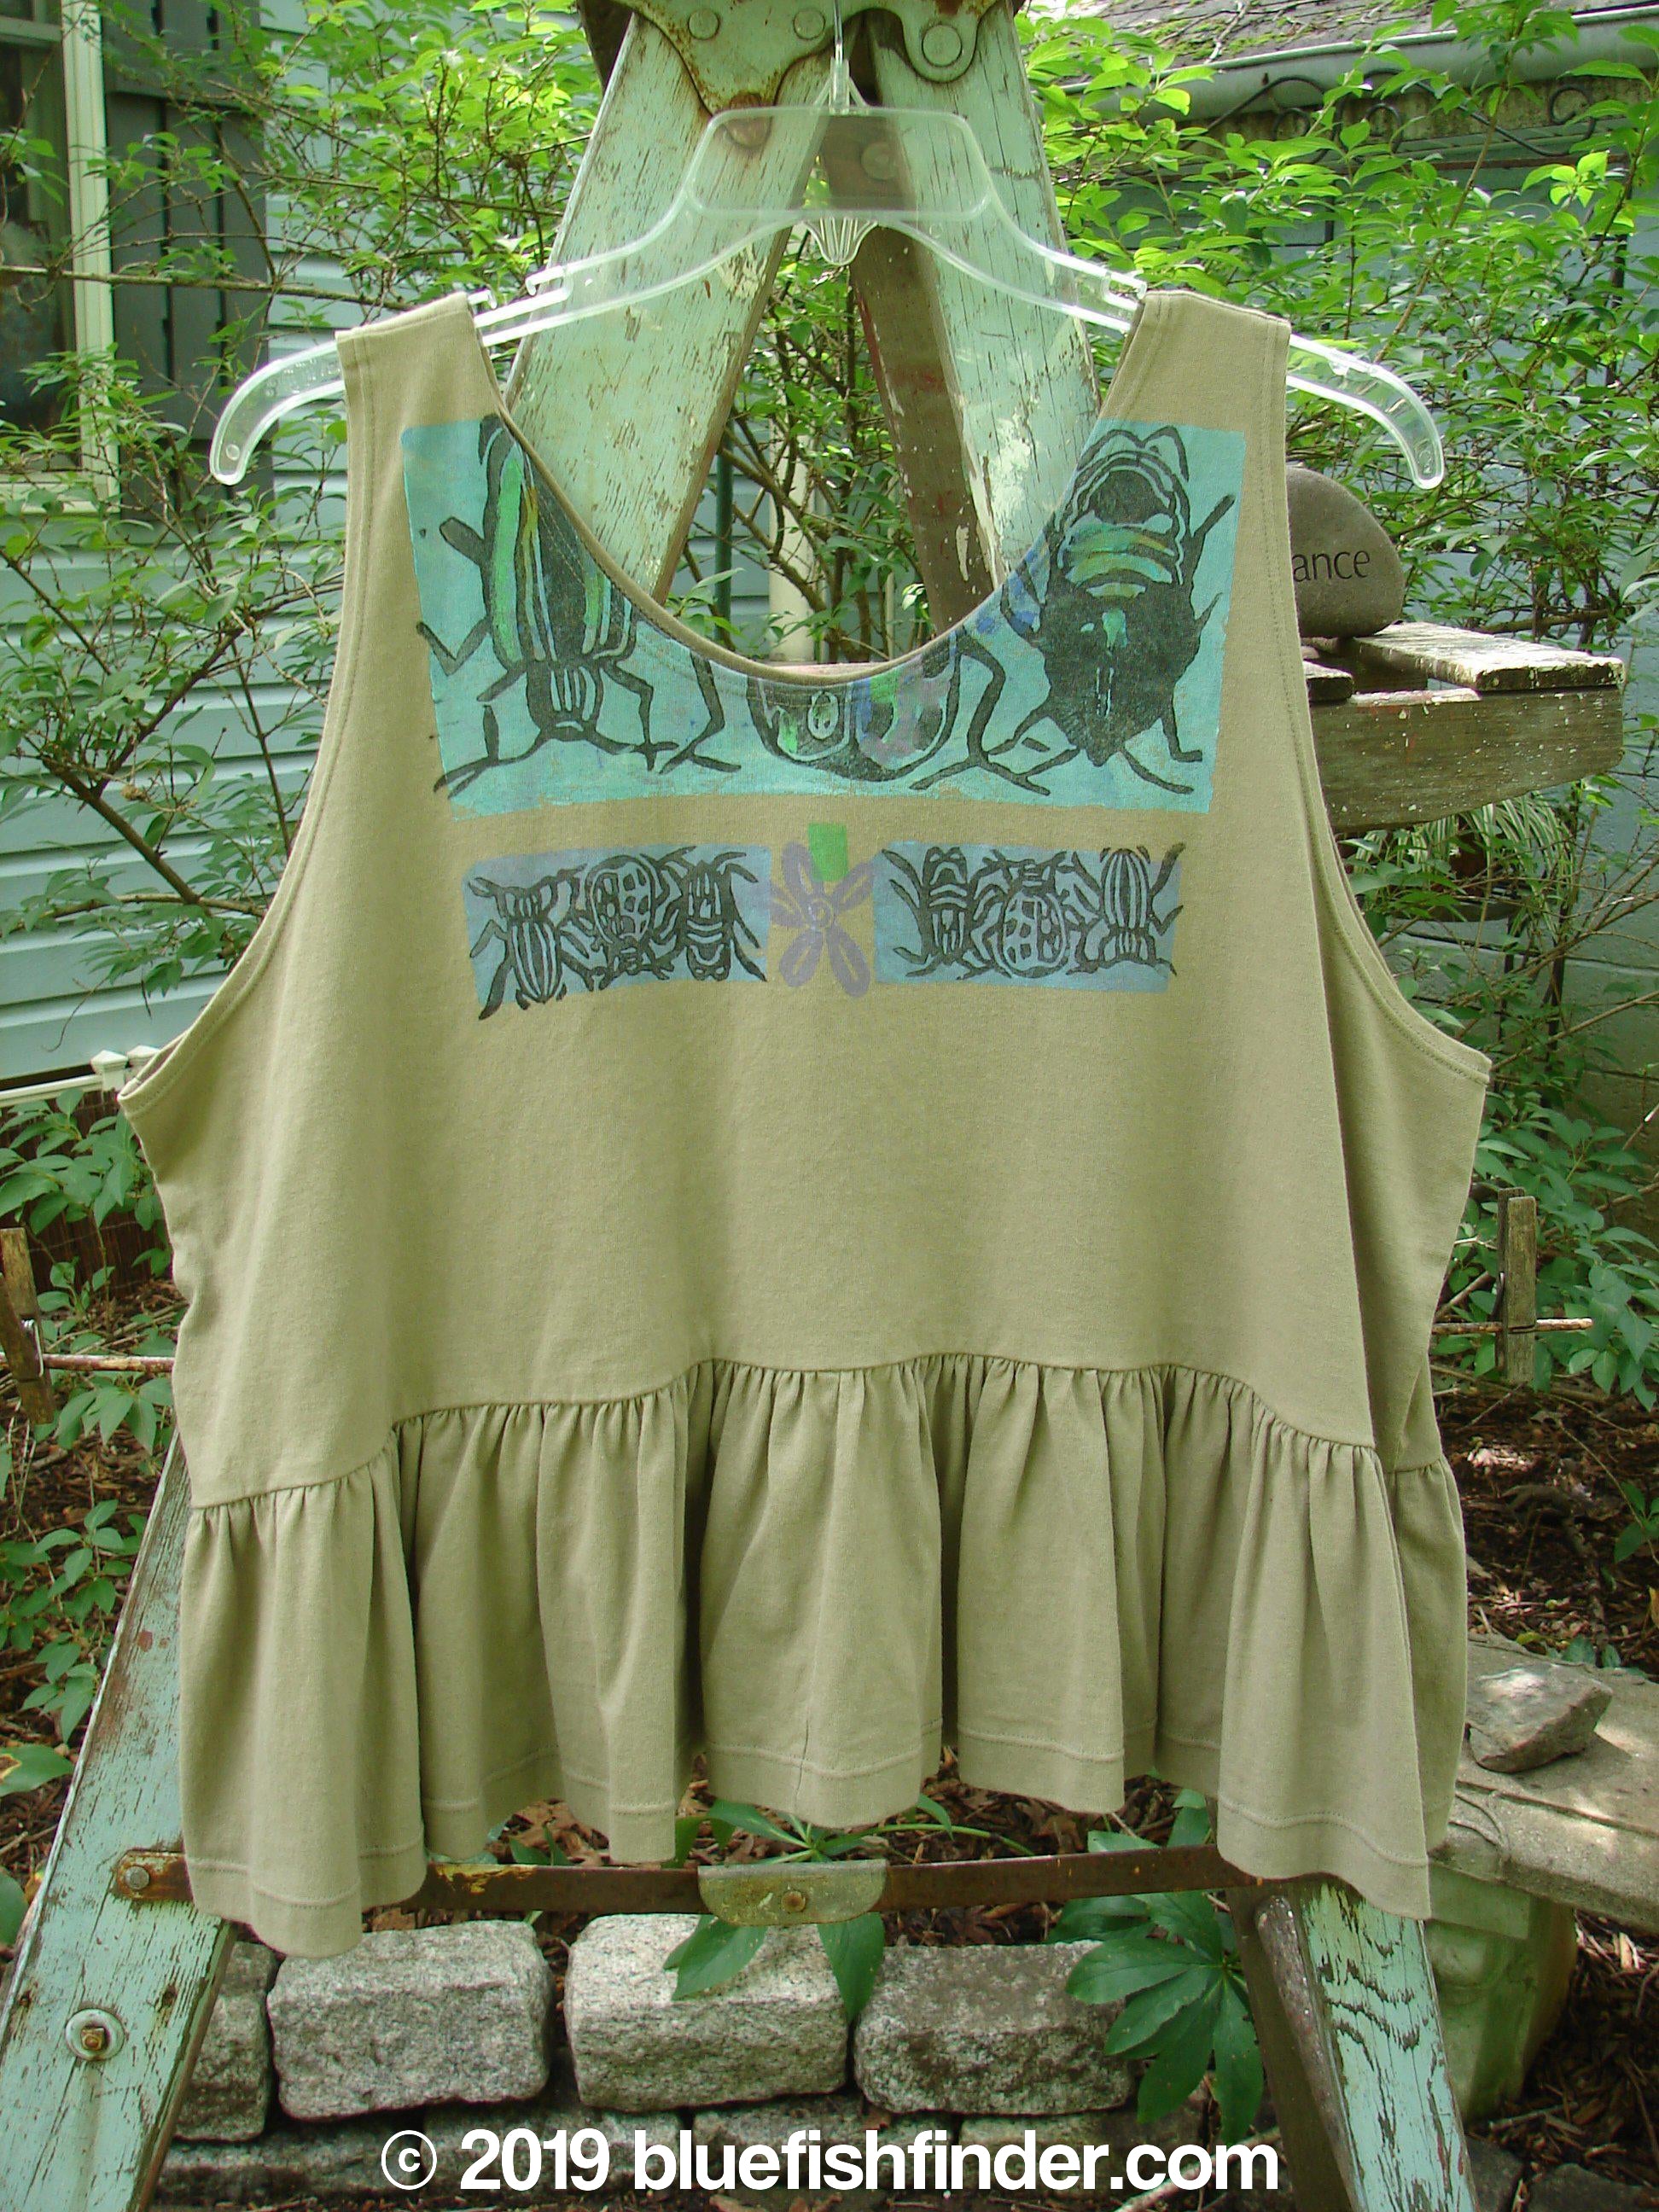 1992 Peplum Top Beetle Wheat OSFA: A rare vintage flounce top with a bug design. Mid-weight cotton, yoked waist seam, rounded neckline, wide waist, and gathered bottom flounce. Bust 50, waist 54, hem circumference 100, length 25 inches.